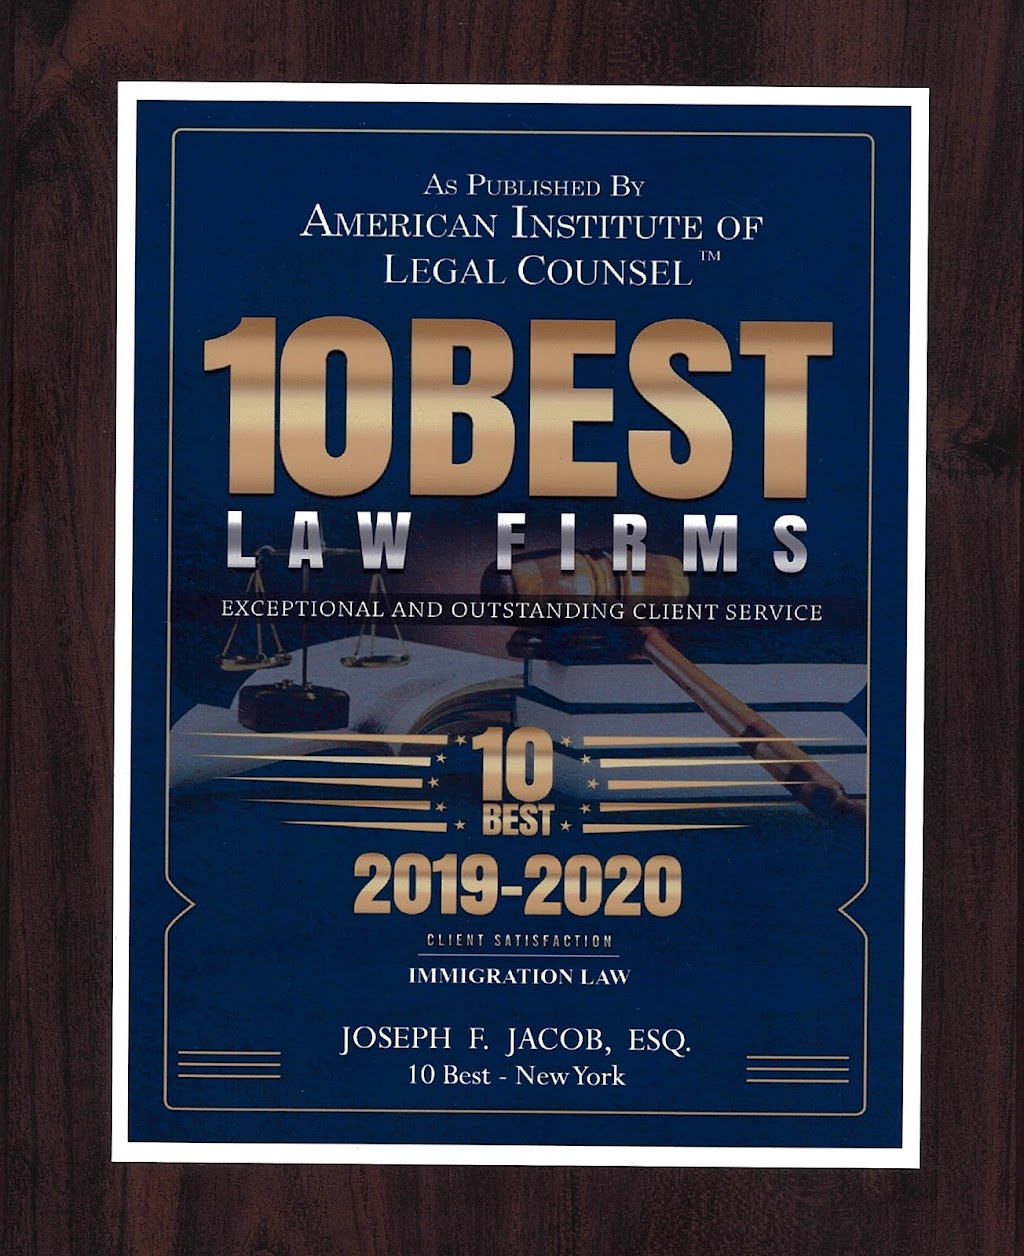 Law offices of Joseph F. Jacob, PLLC | 125 Wolf Rd #309, Albany, NY 12205, USA | Phone: (518) 472-0230